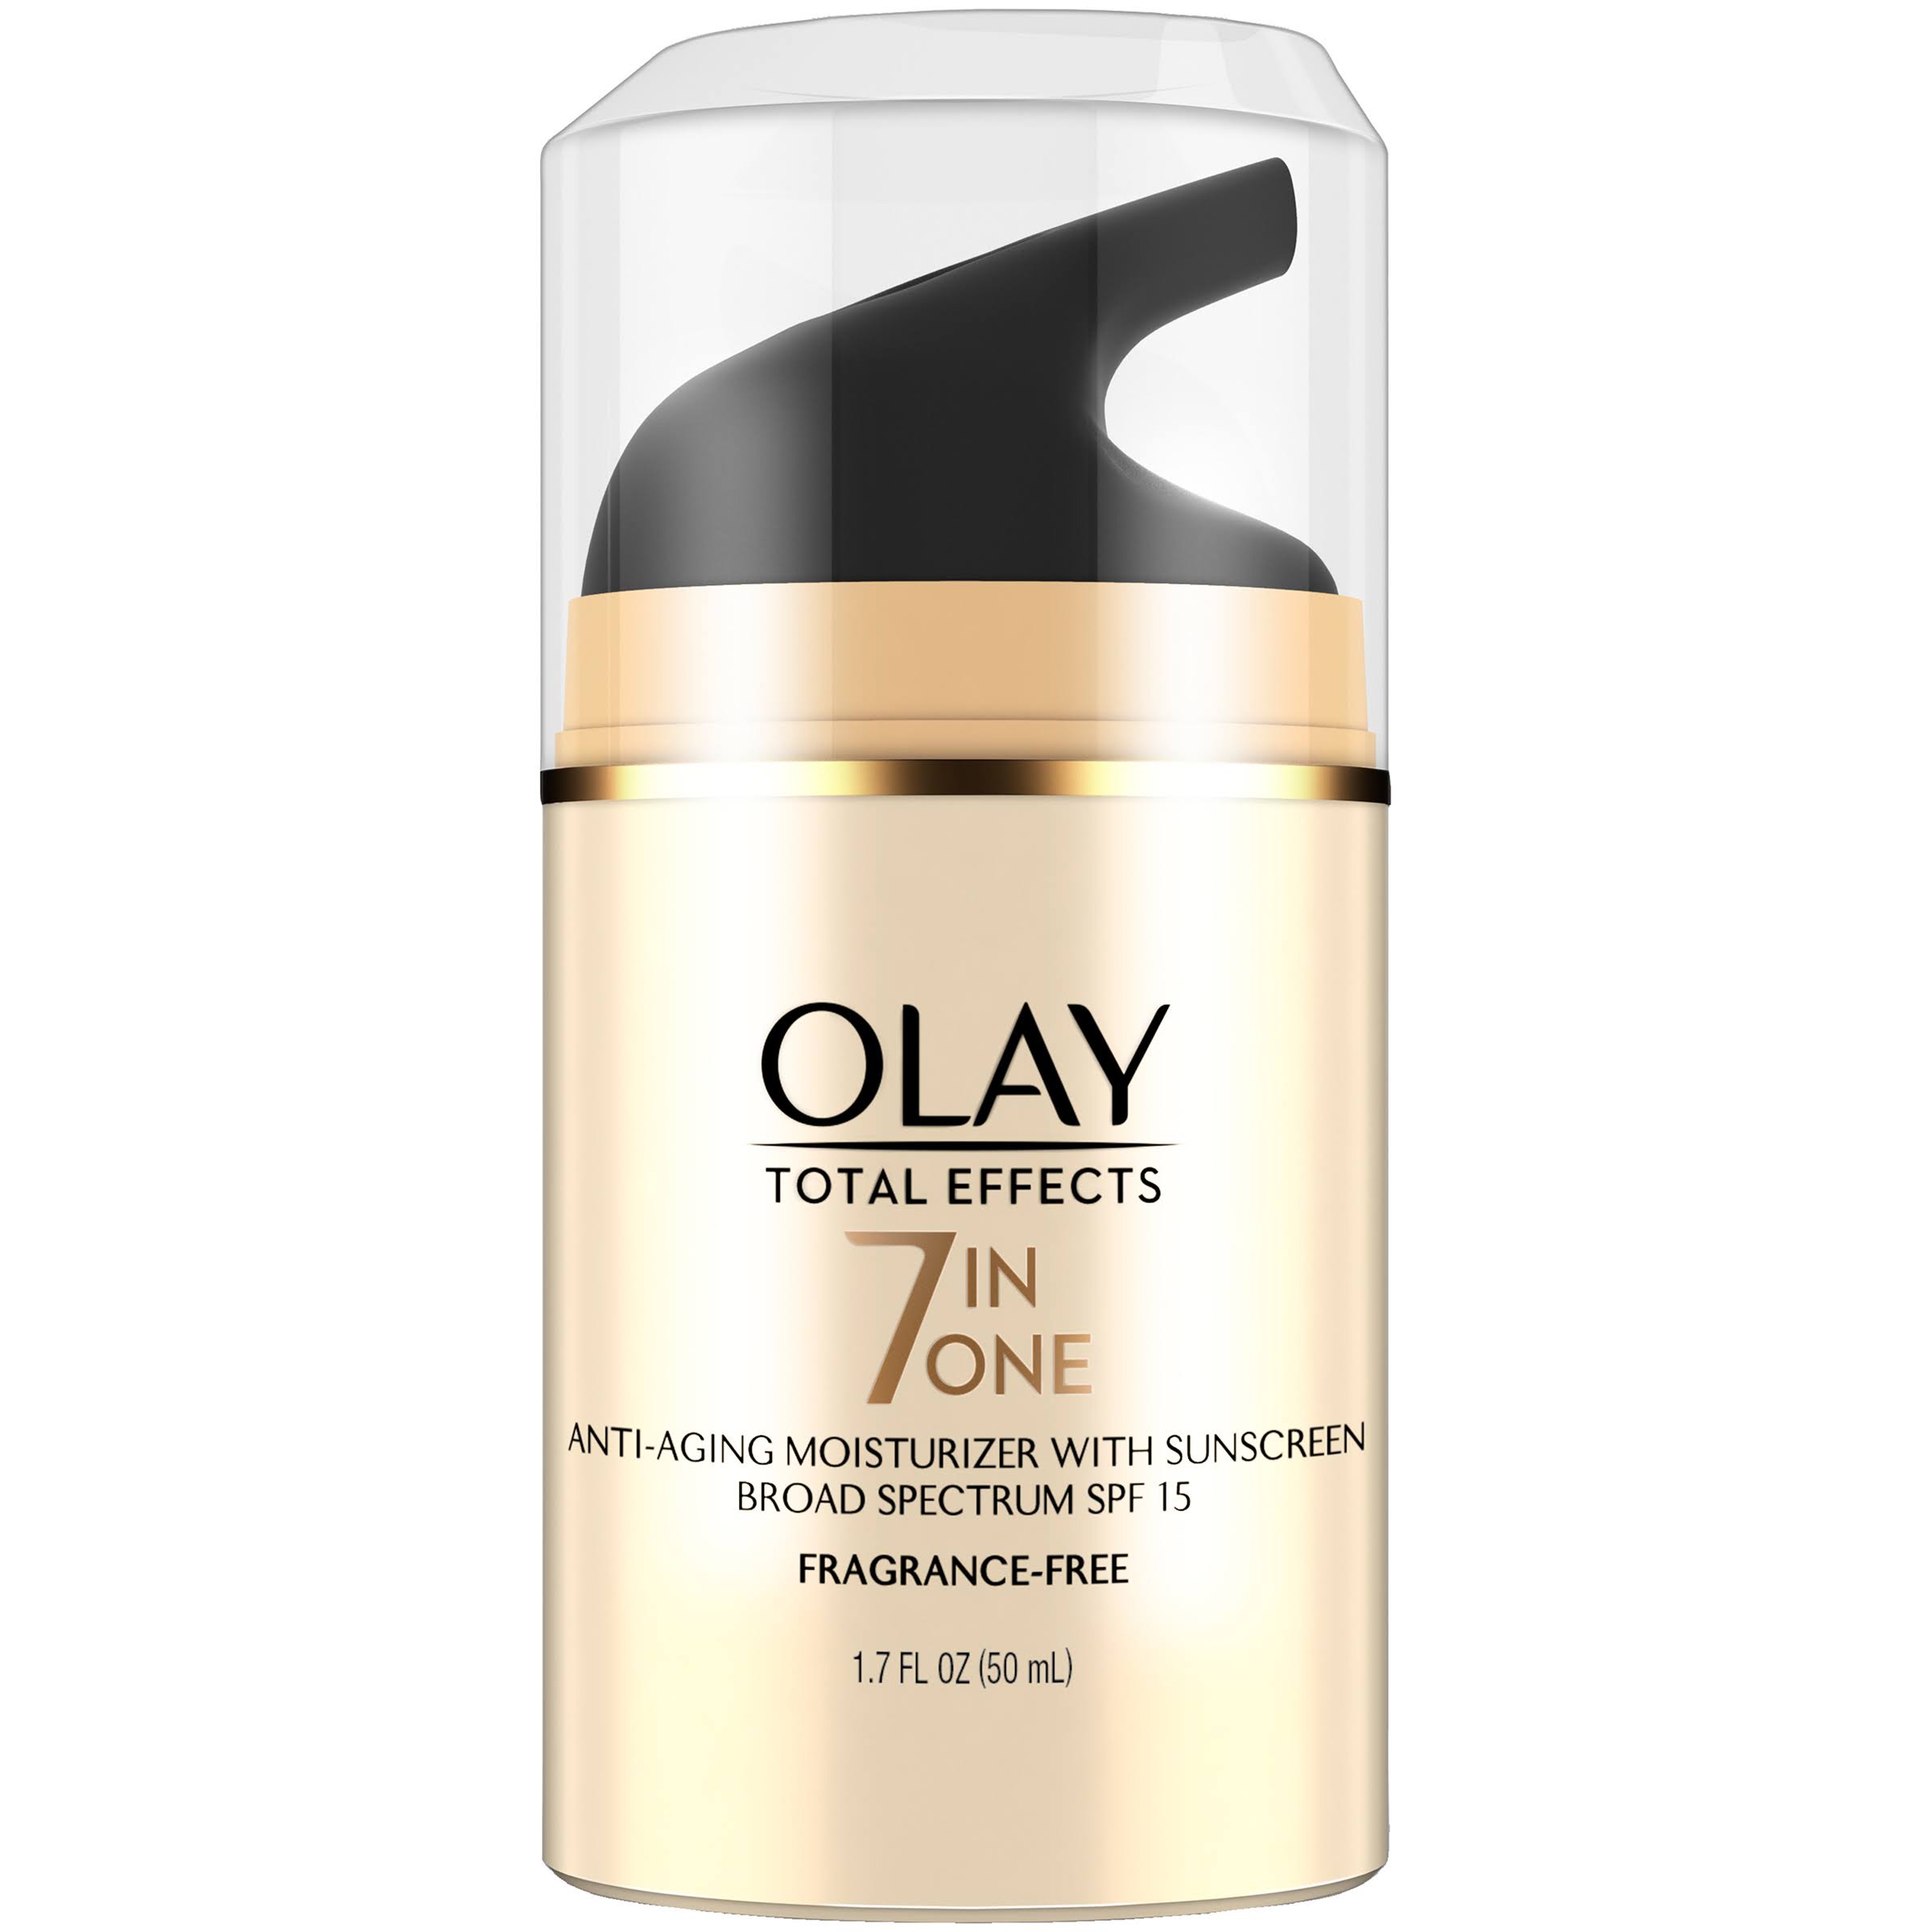 Olay Total Effects Fragrance Anti Aging Moisturizer - with Sunscreen, Spf 15, 1.7oz